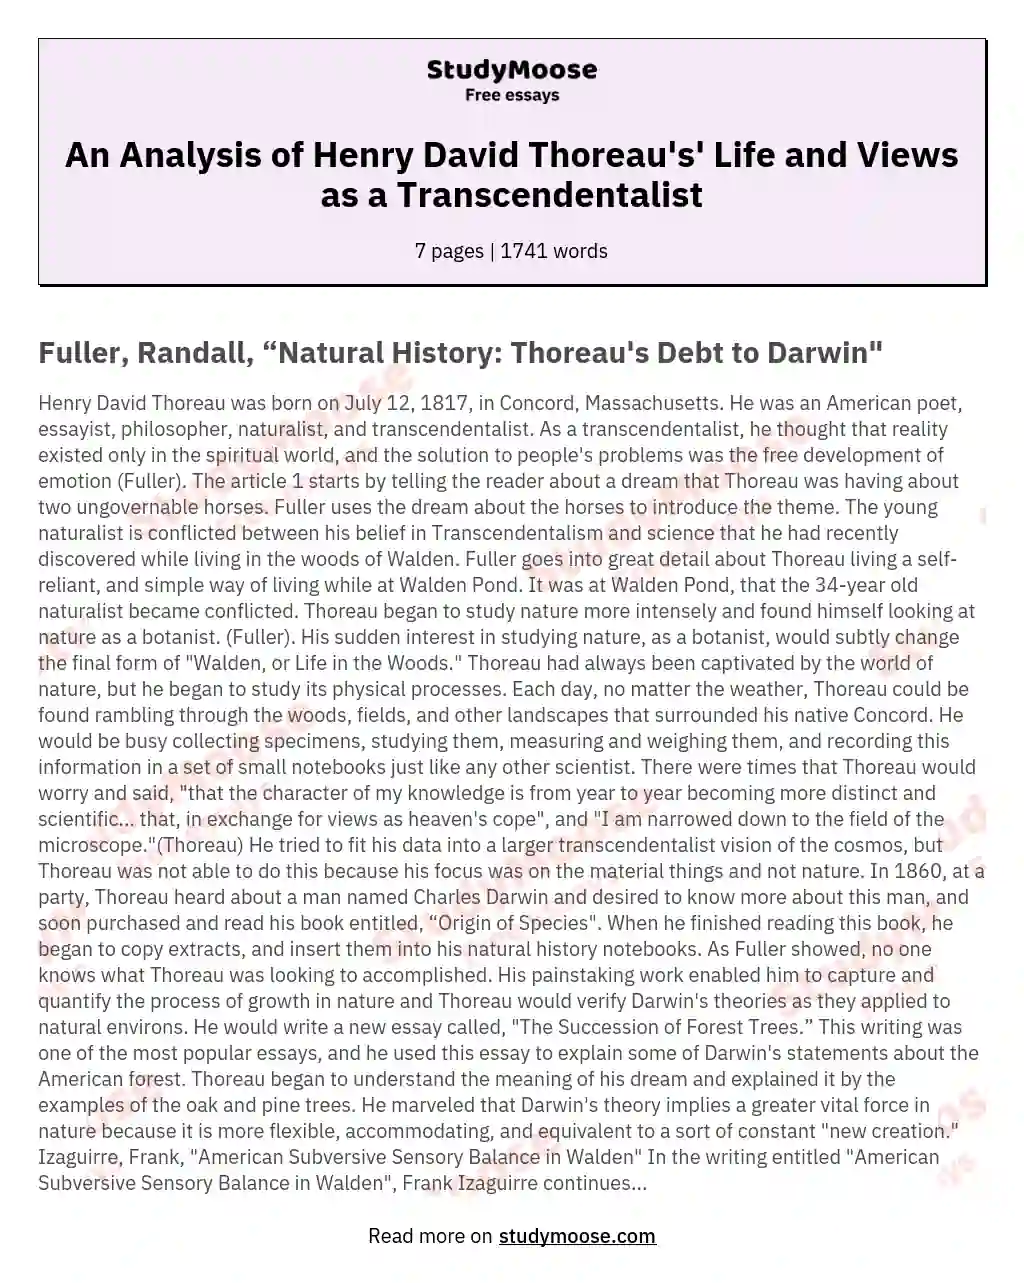 An Analysis of Henry David Thoreau's' Life and Views as a Transcendentalist